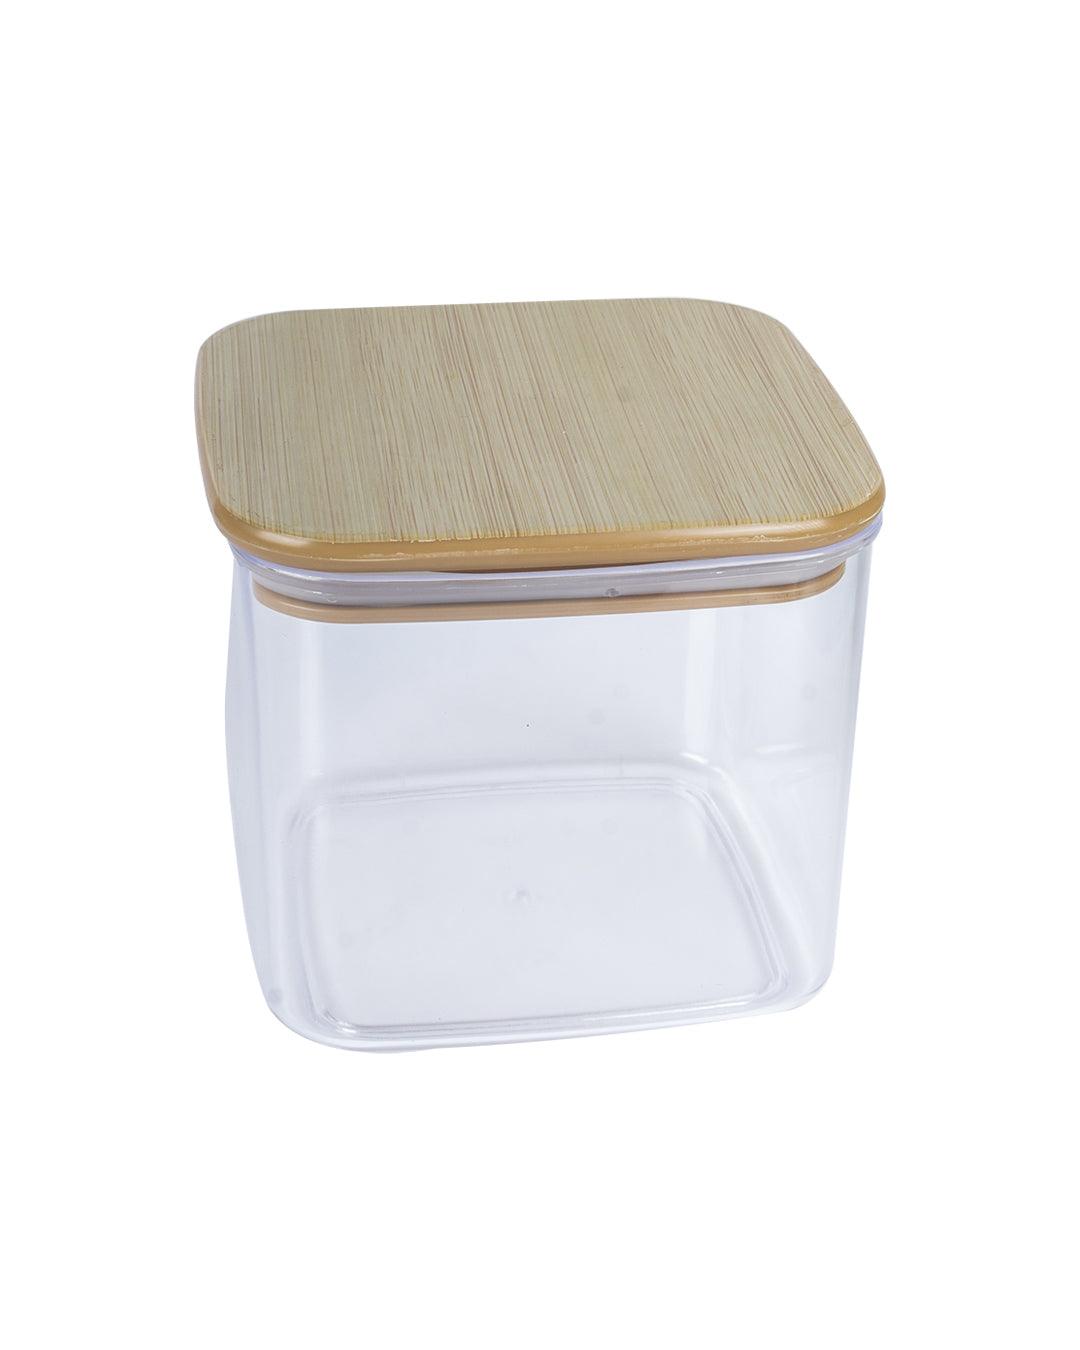 https://market99.com/cdn/shop/files/sealed-container-brown-plastic-1-litre-food-storage-containers-2-29021574987946_2048x.jpg?v=1697009287